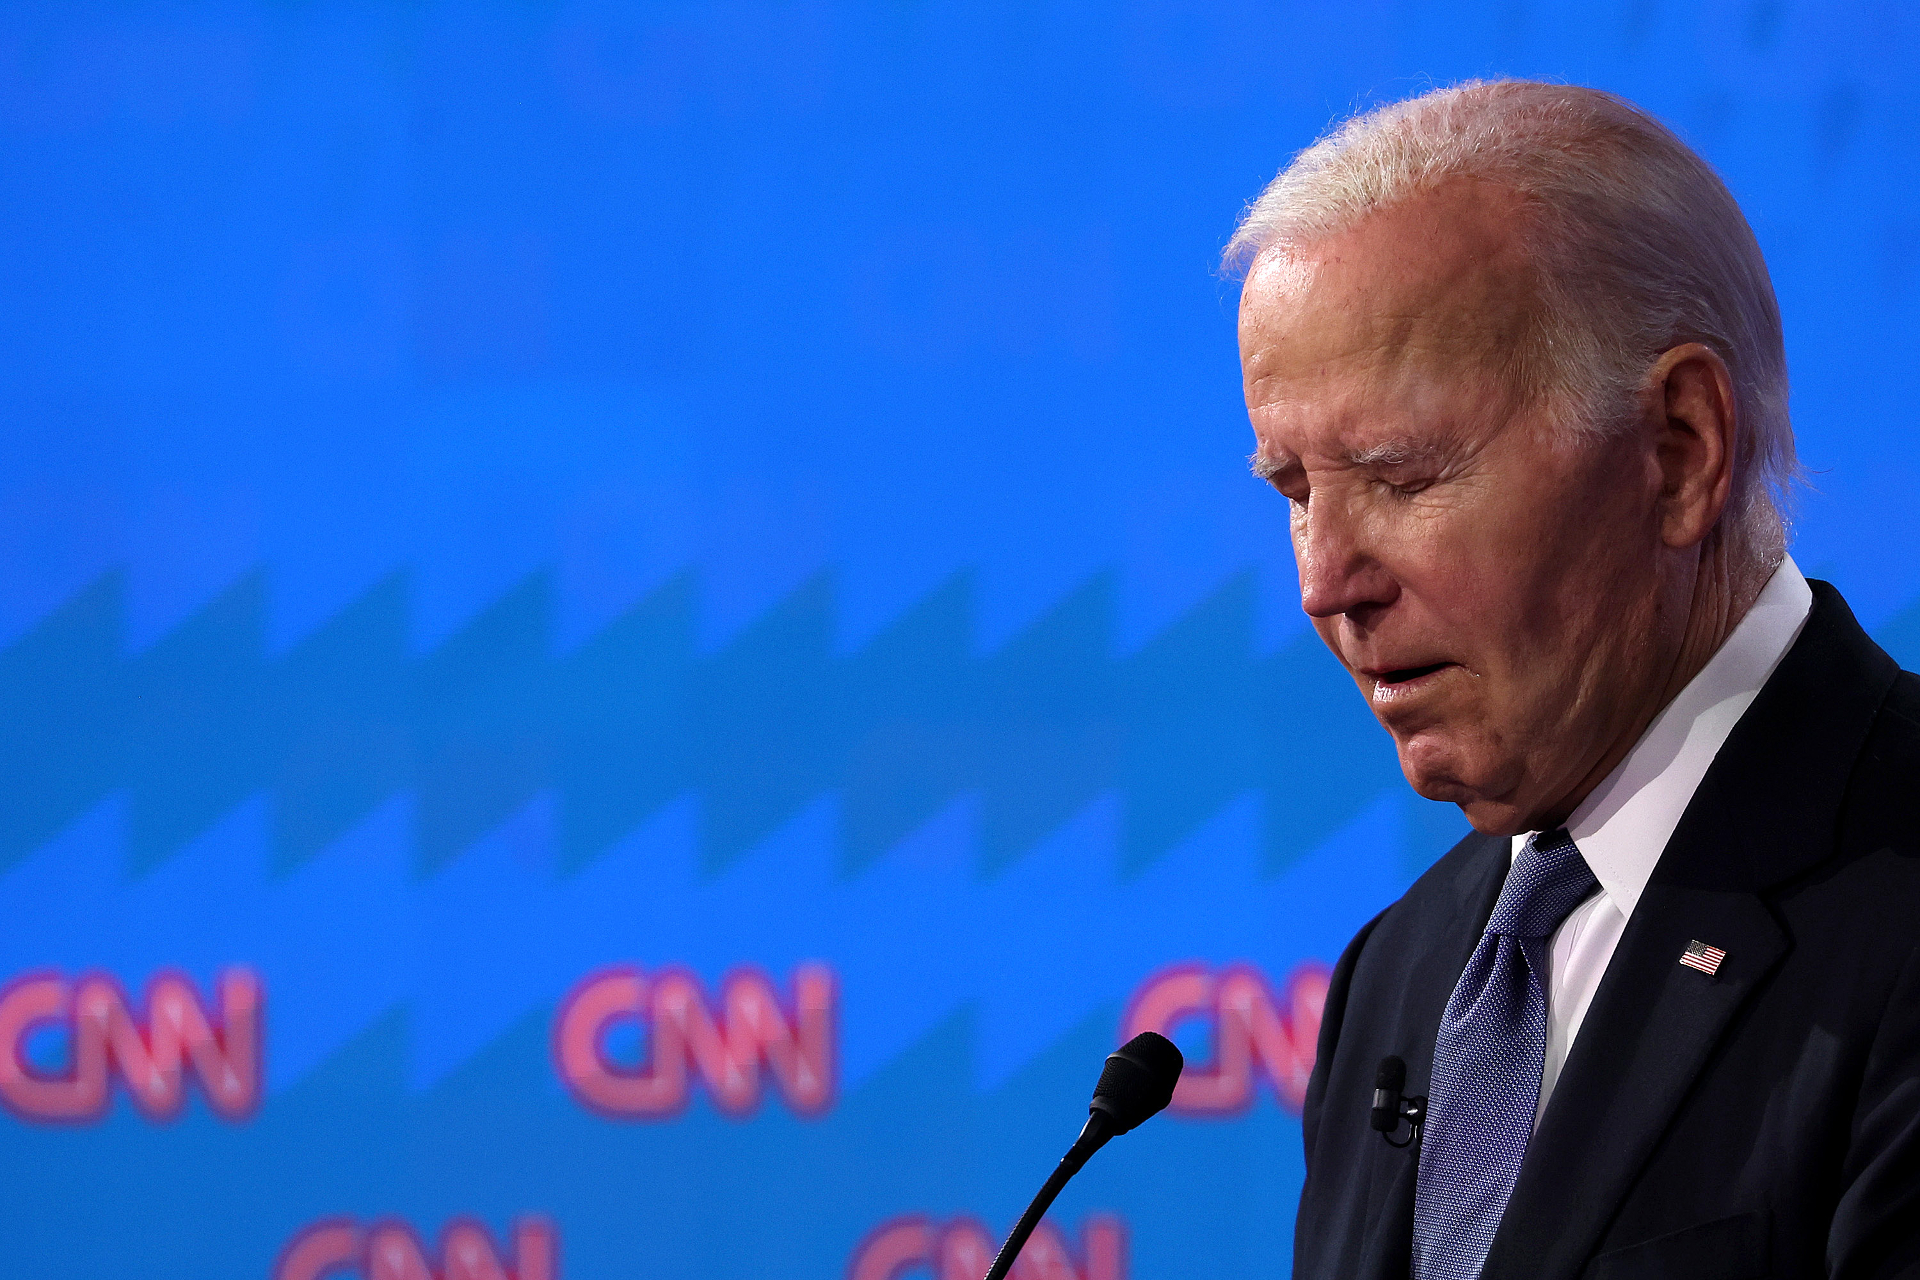 Democrats panic and weigh their options after Biden's lackluster debate performance